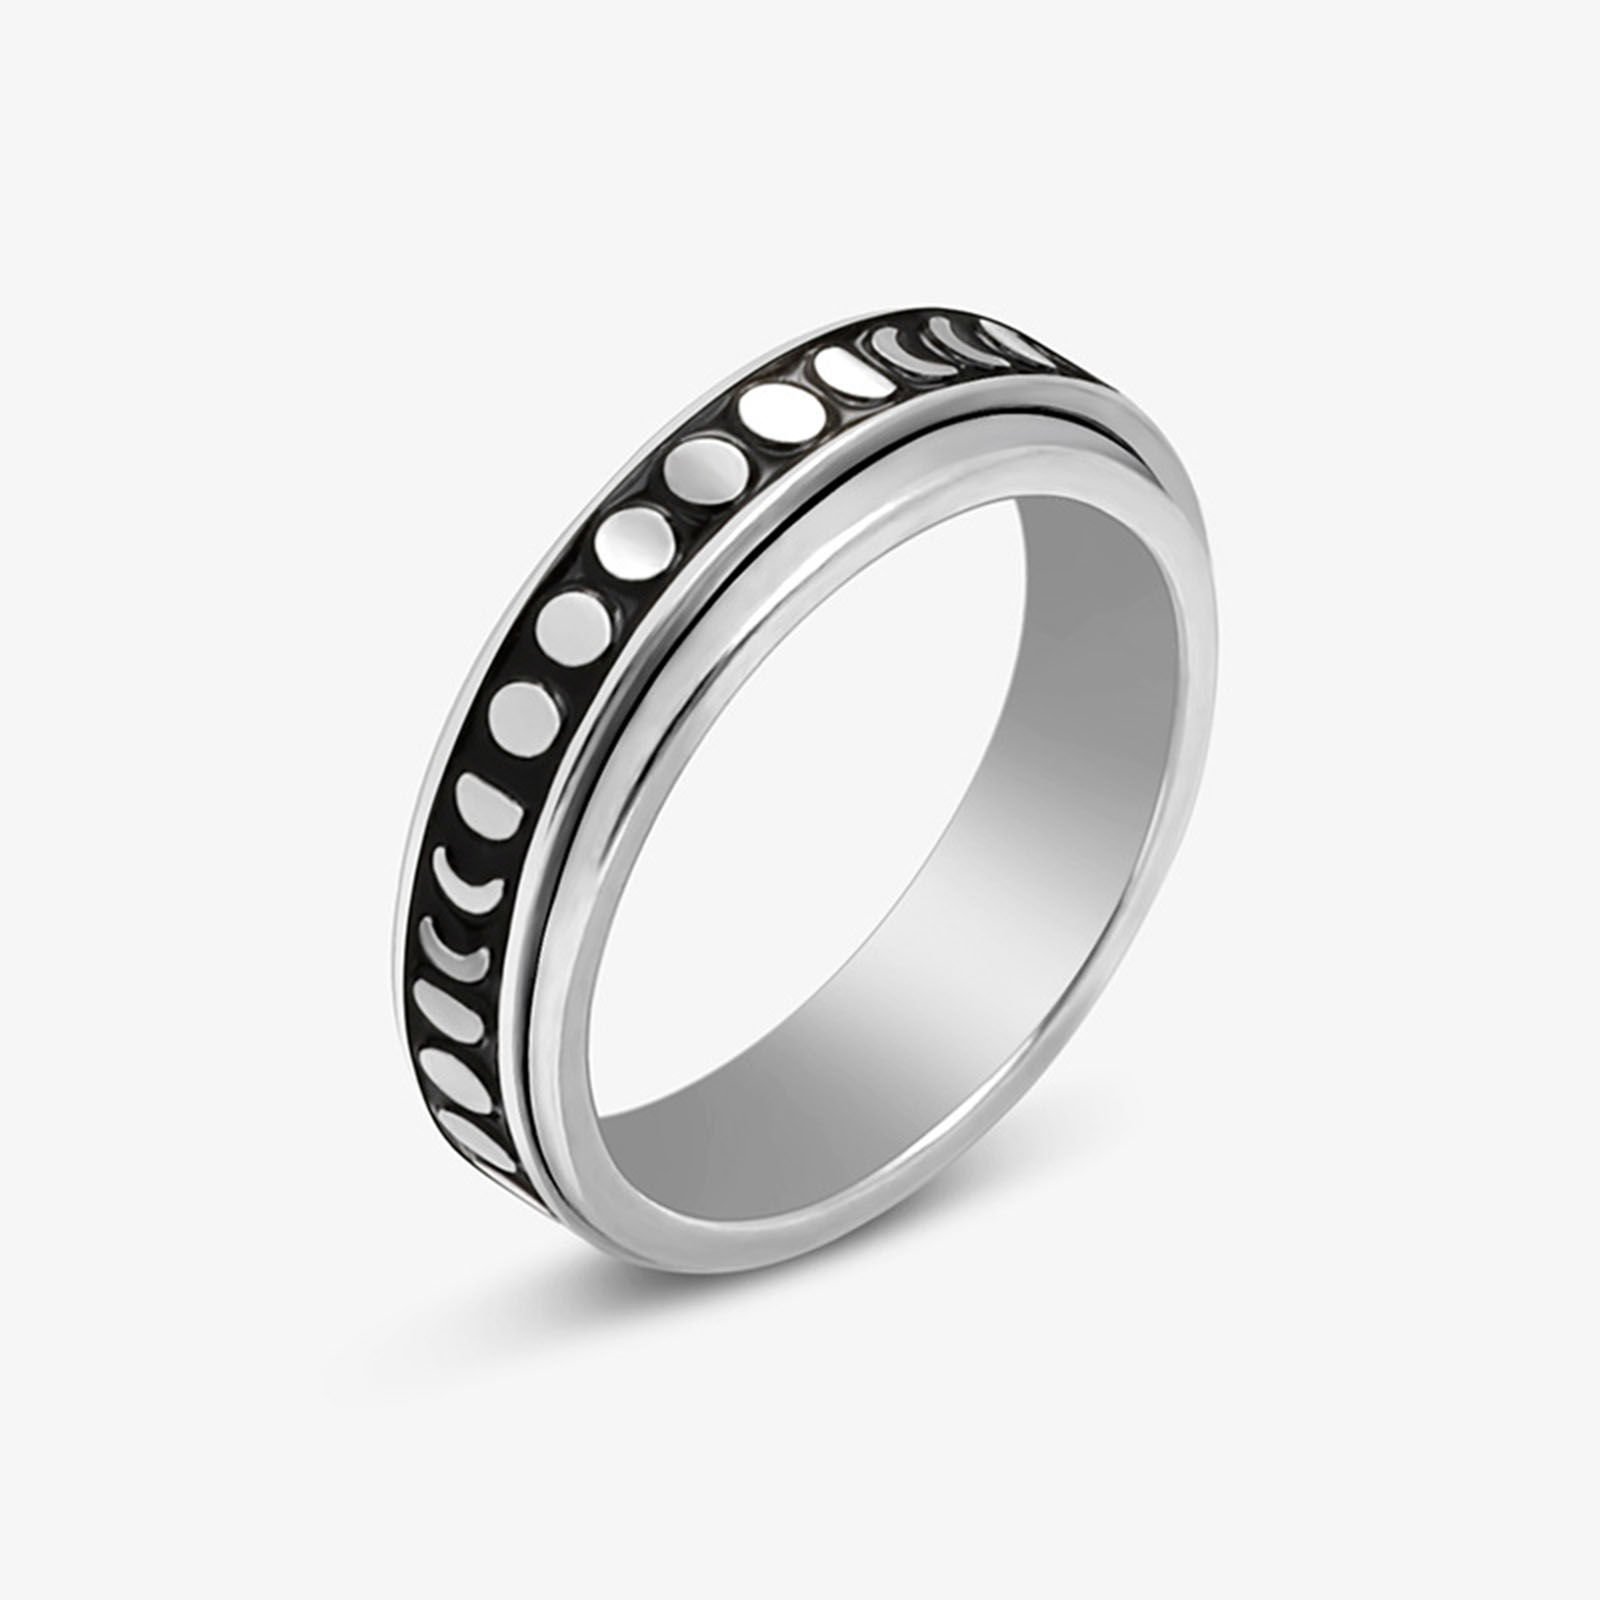 Picture of Stainless Steel Unadjustable Spinner Rings Fidget Ring Stress Relieving Anxiety Ring Silver Tone Black Rotatable Half Moon Enamel 18.1mm(US Size 8), 1 Piece